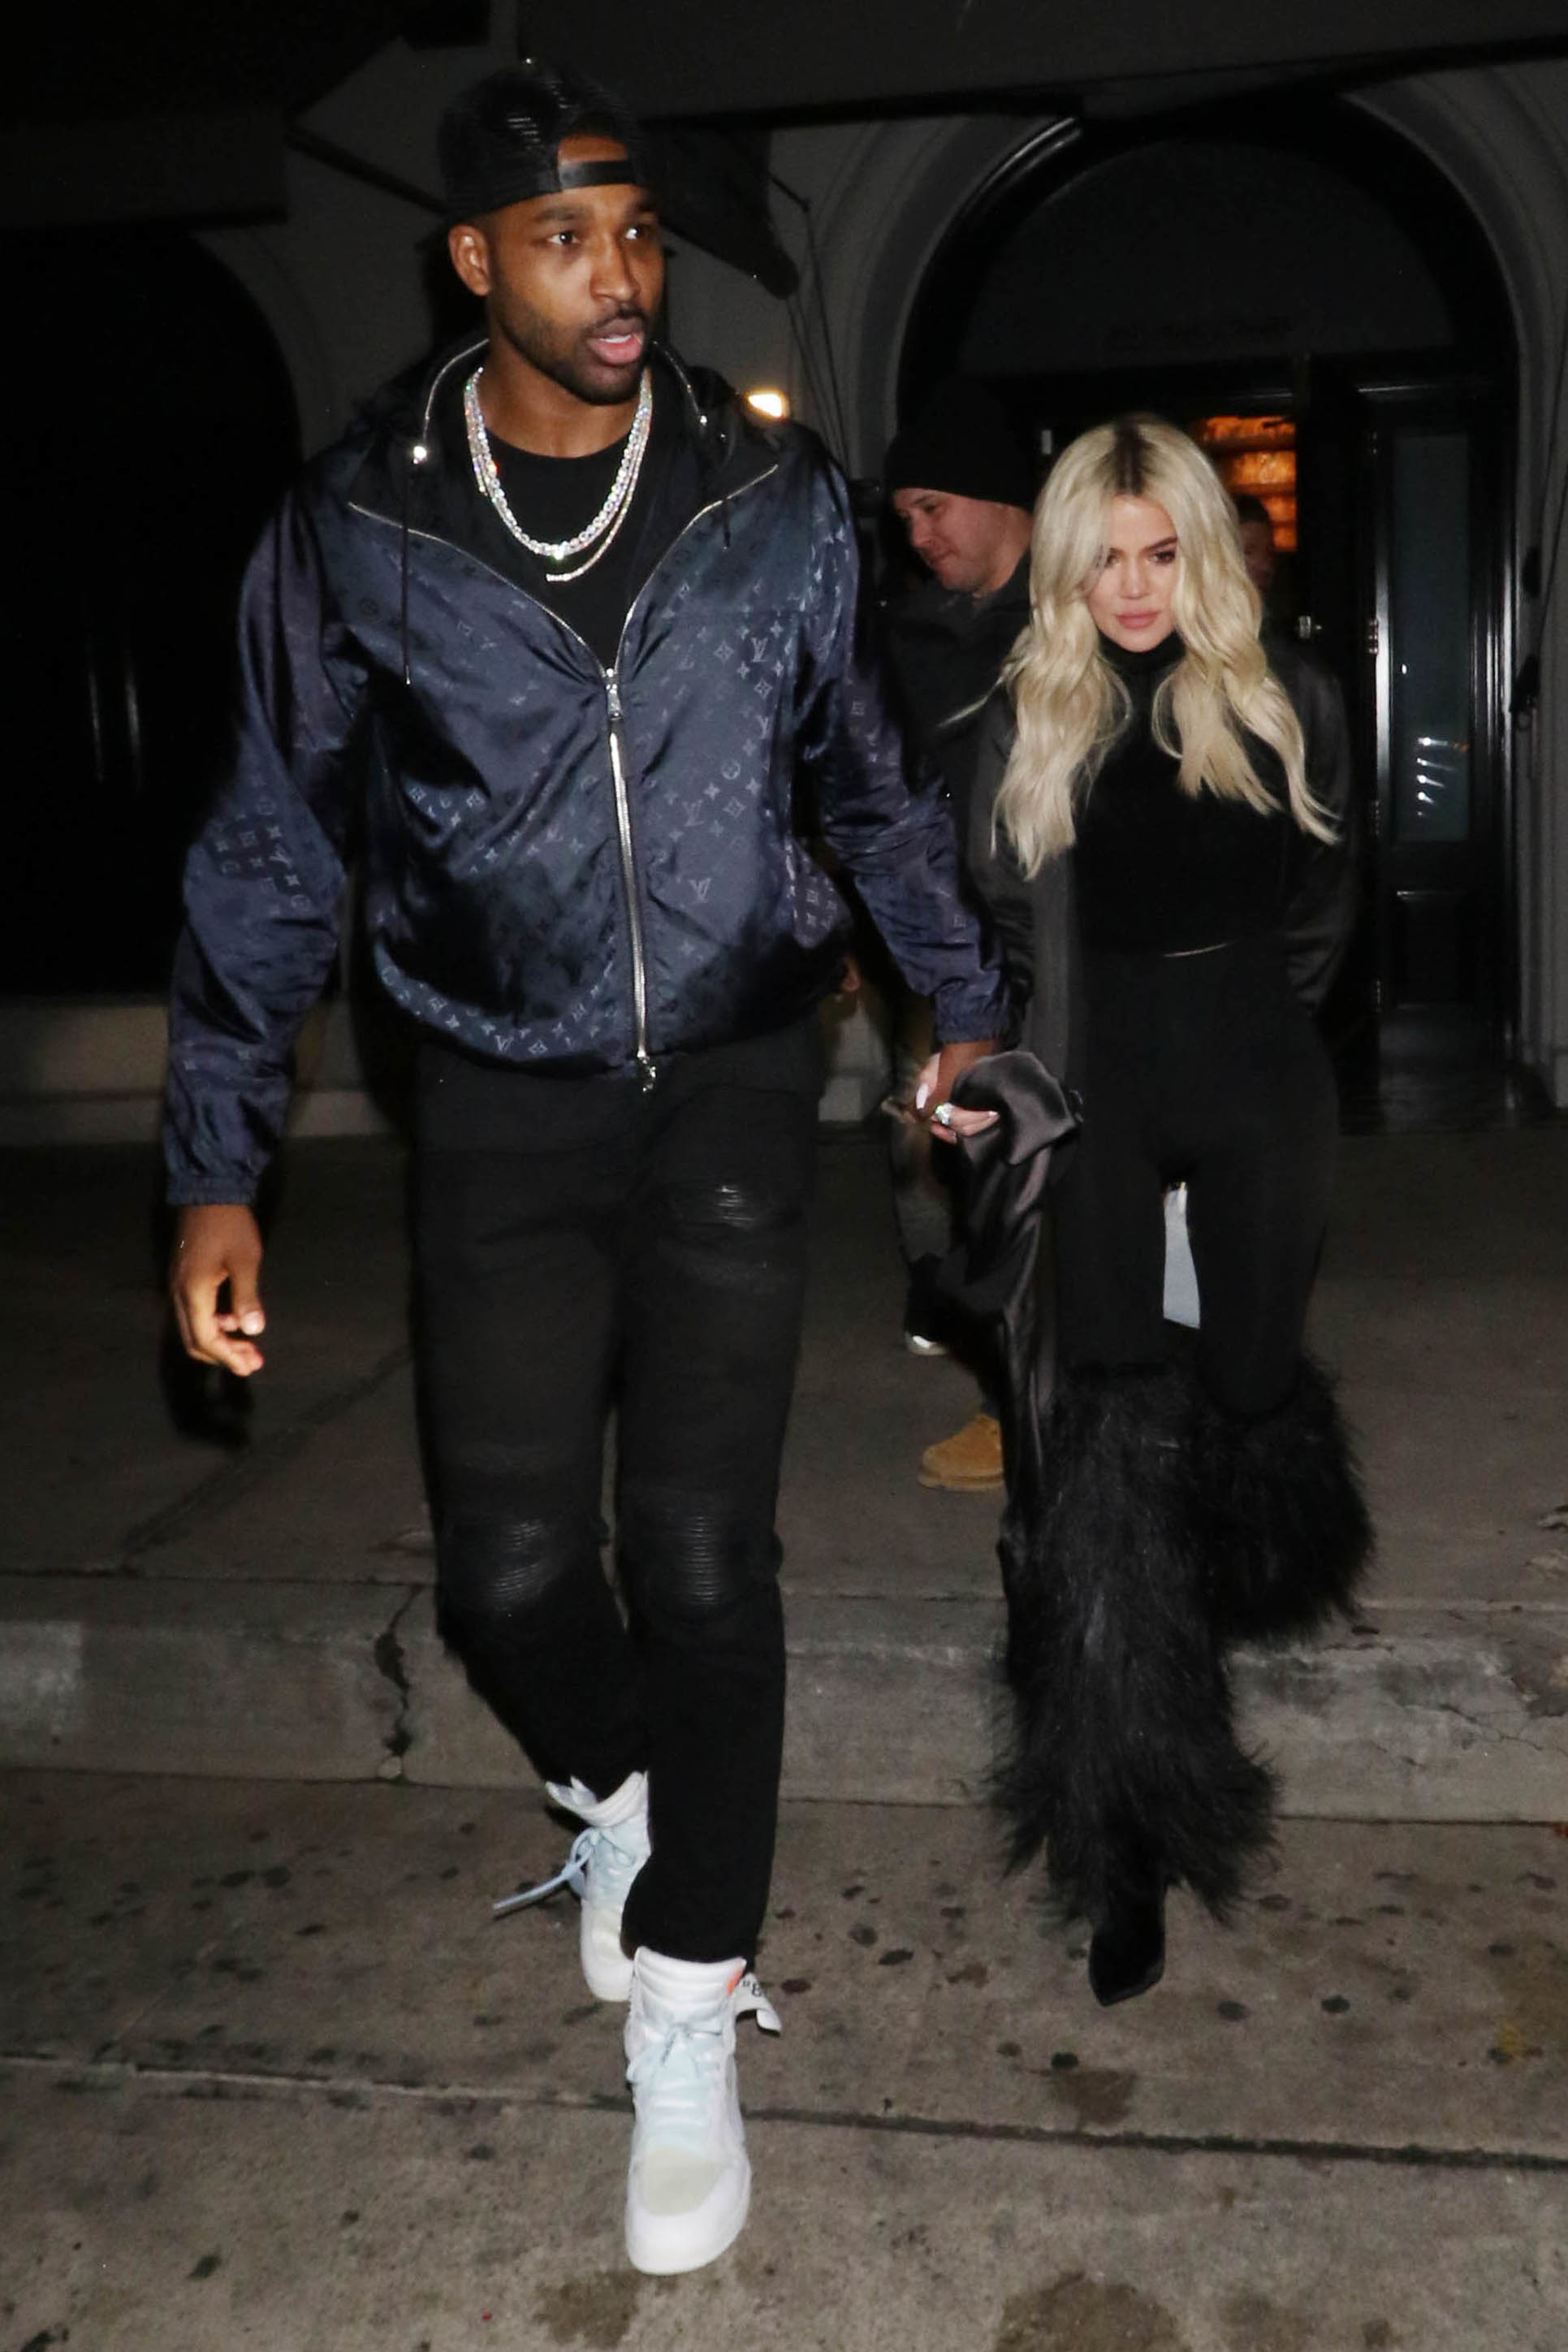 Close-up of Tristan and Khloé holding hands and walking on the street